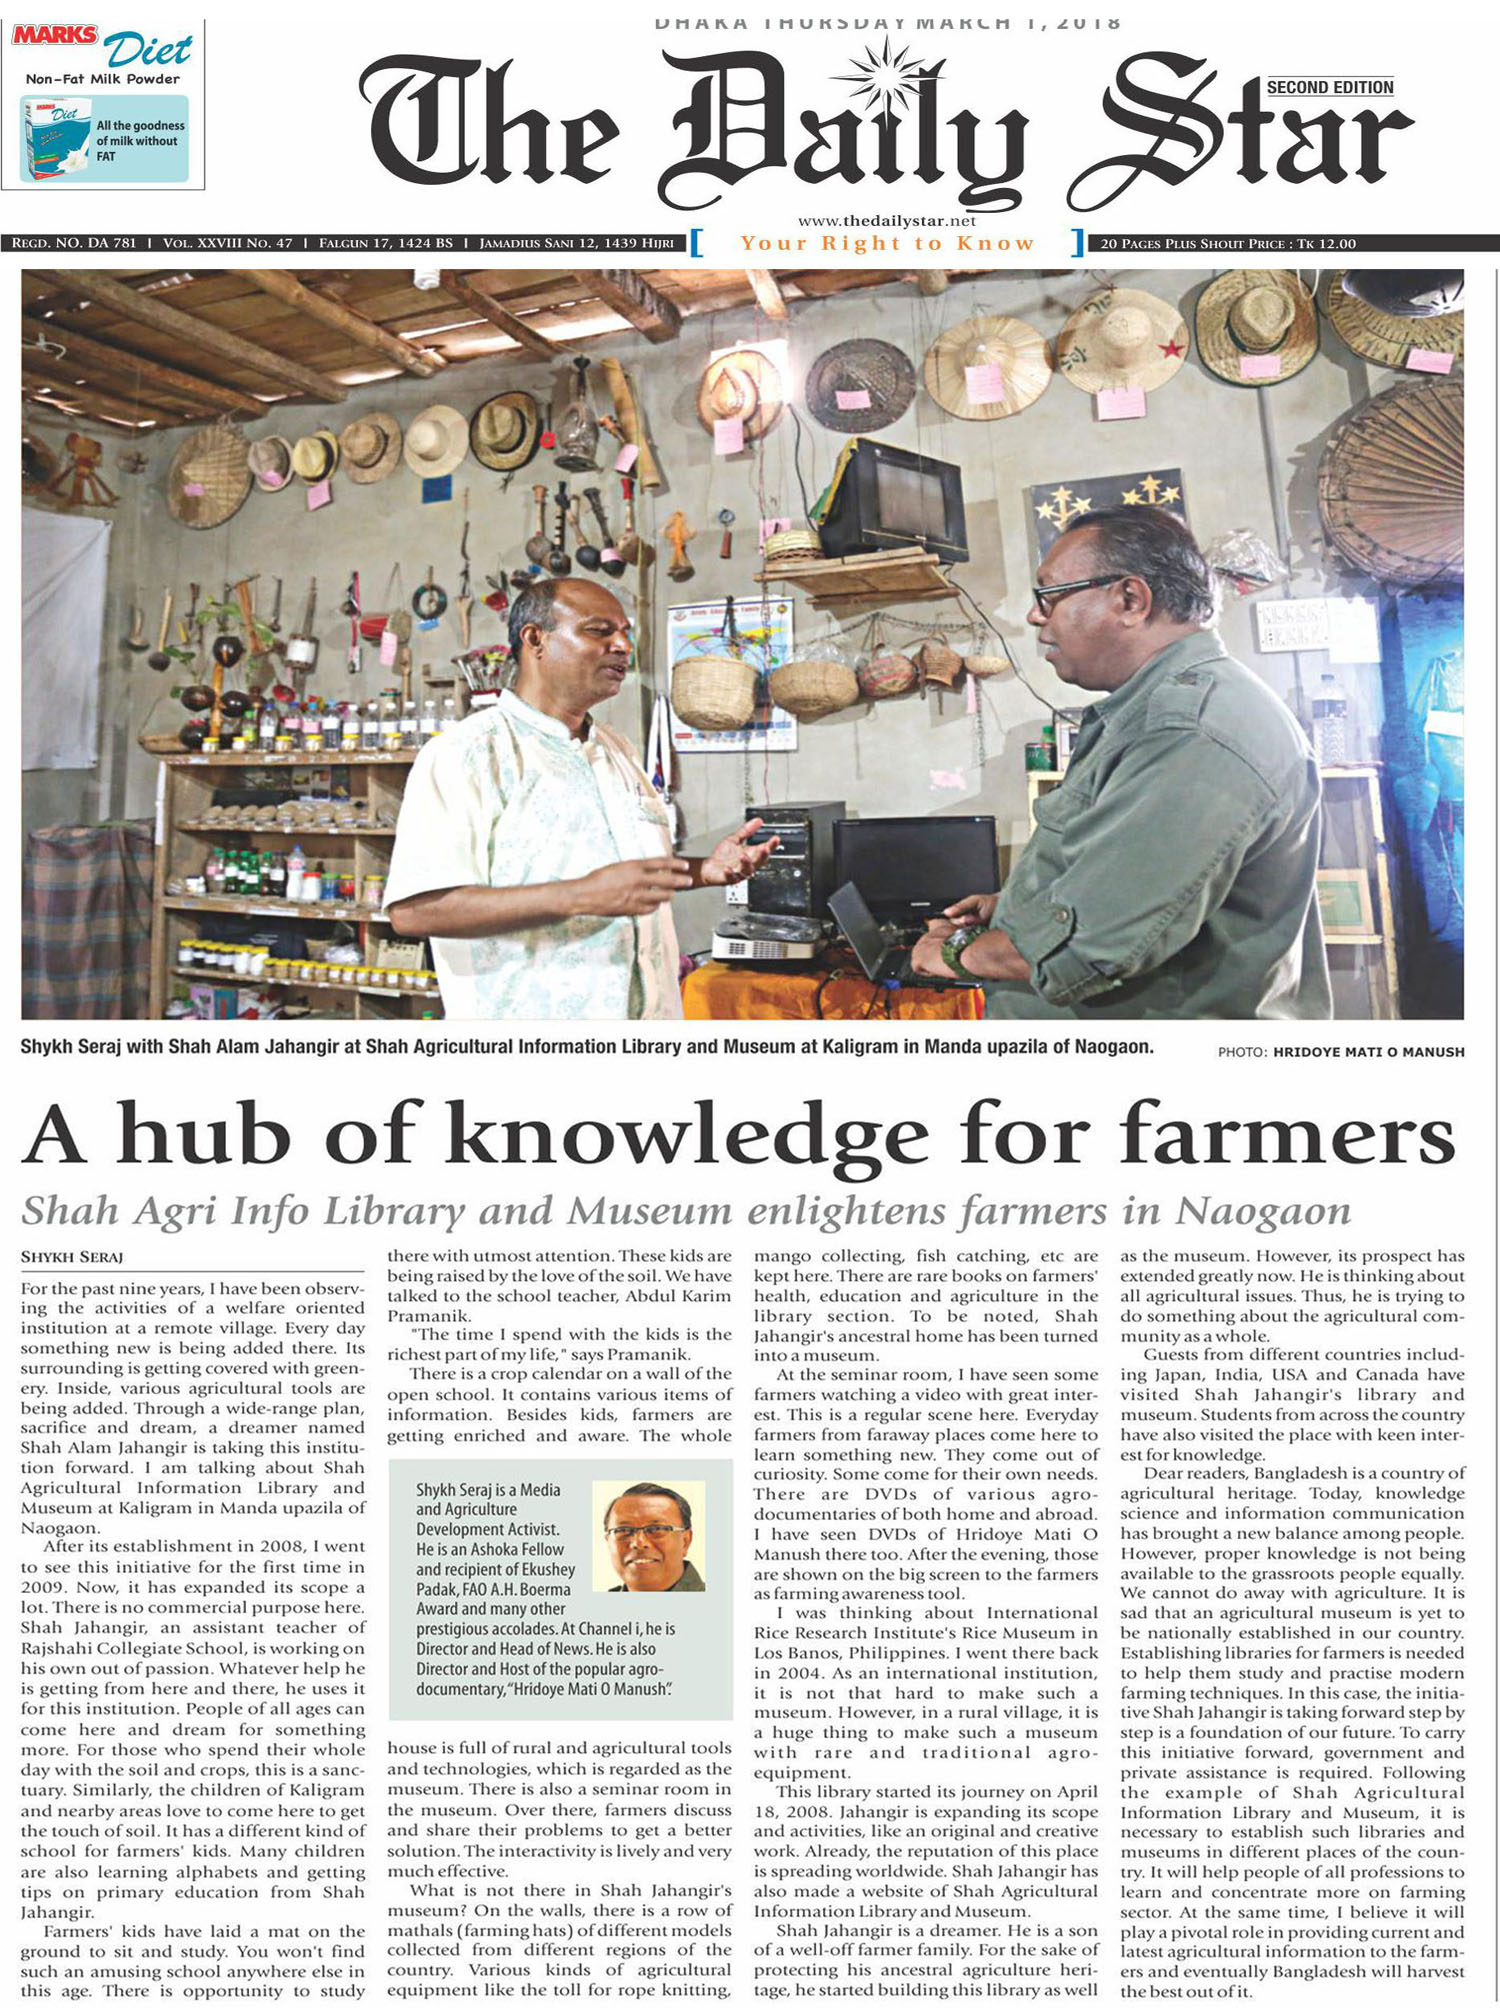 "A hub of knowledge for farmers" March 2018,The Daily Star